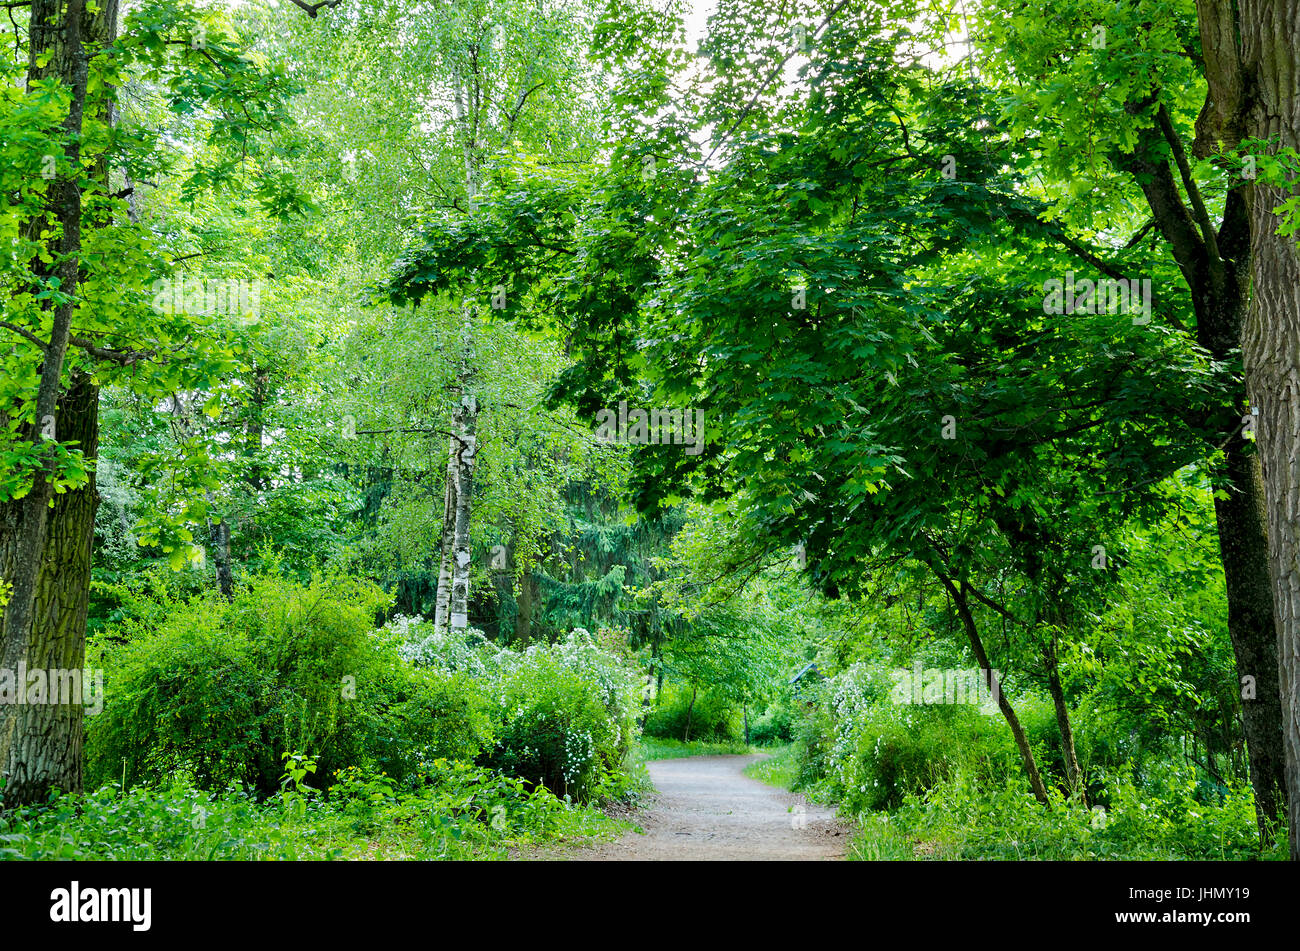 Road in a bright forest on a summer day with motley grass and blooming white flowers shrubs Stock Photo